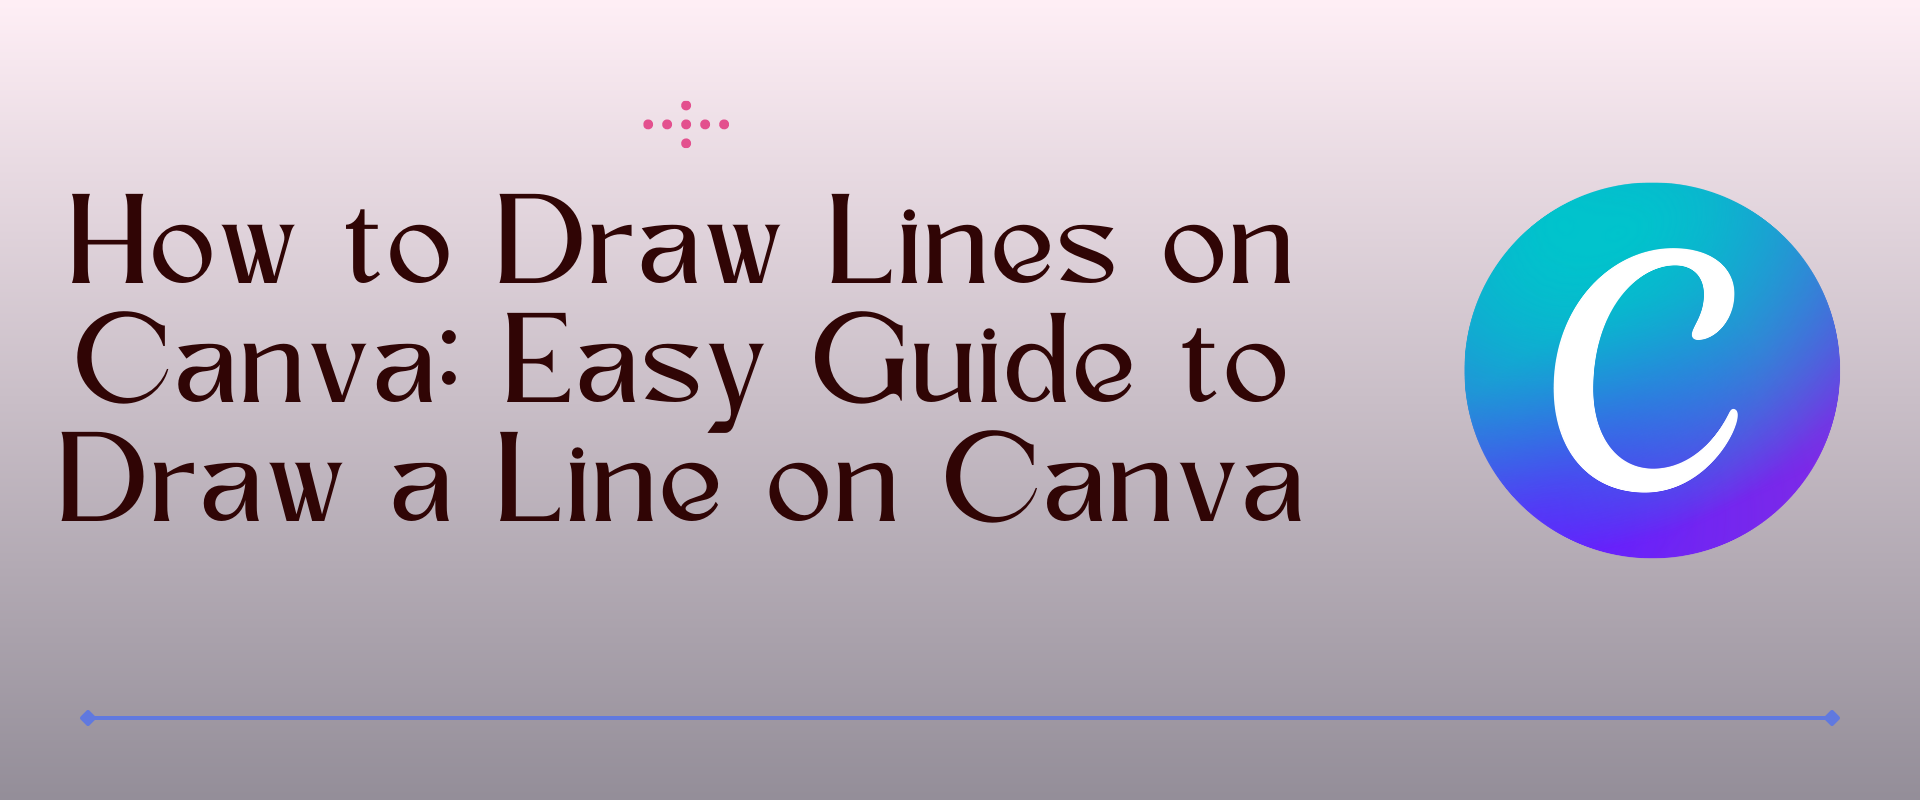 how to draw lines in canva